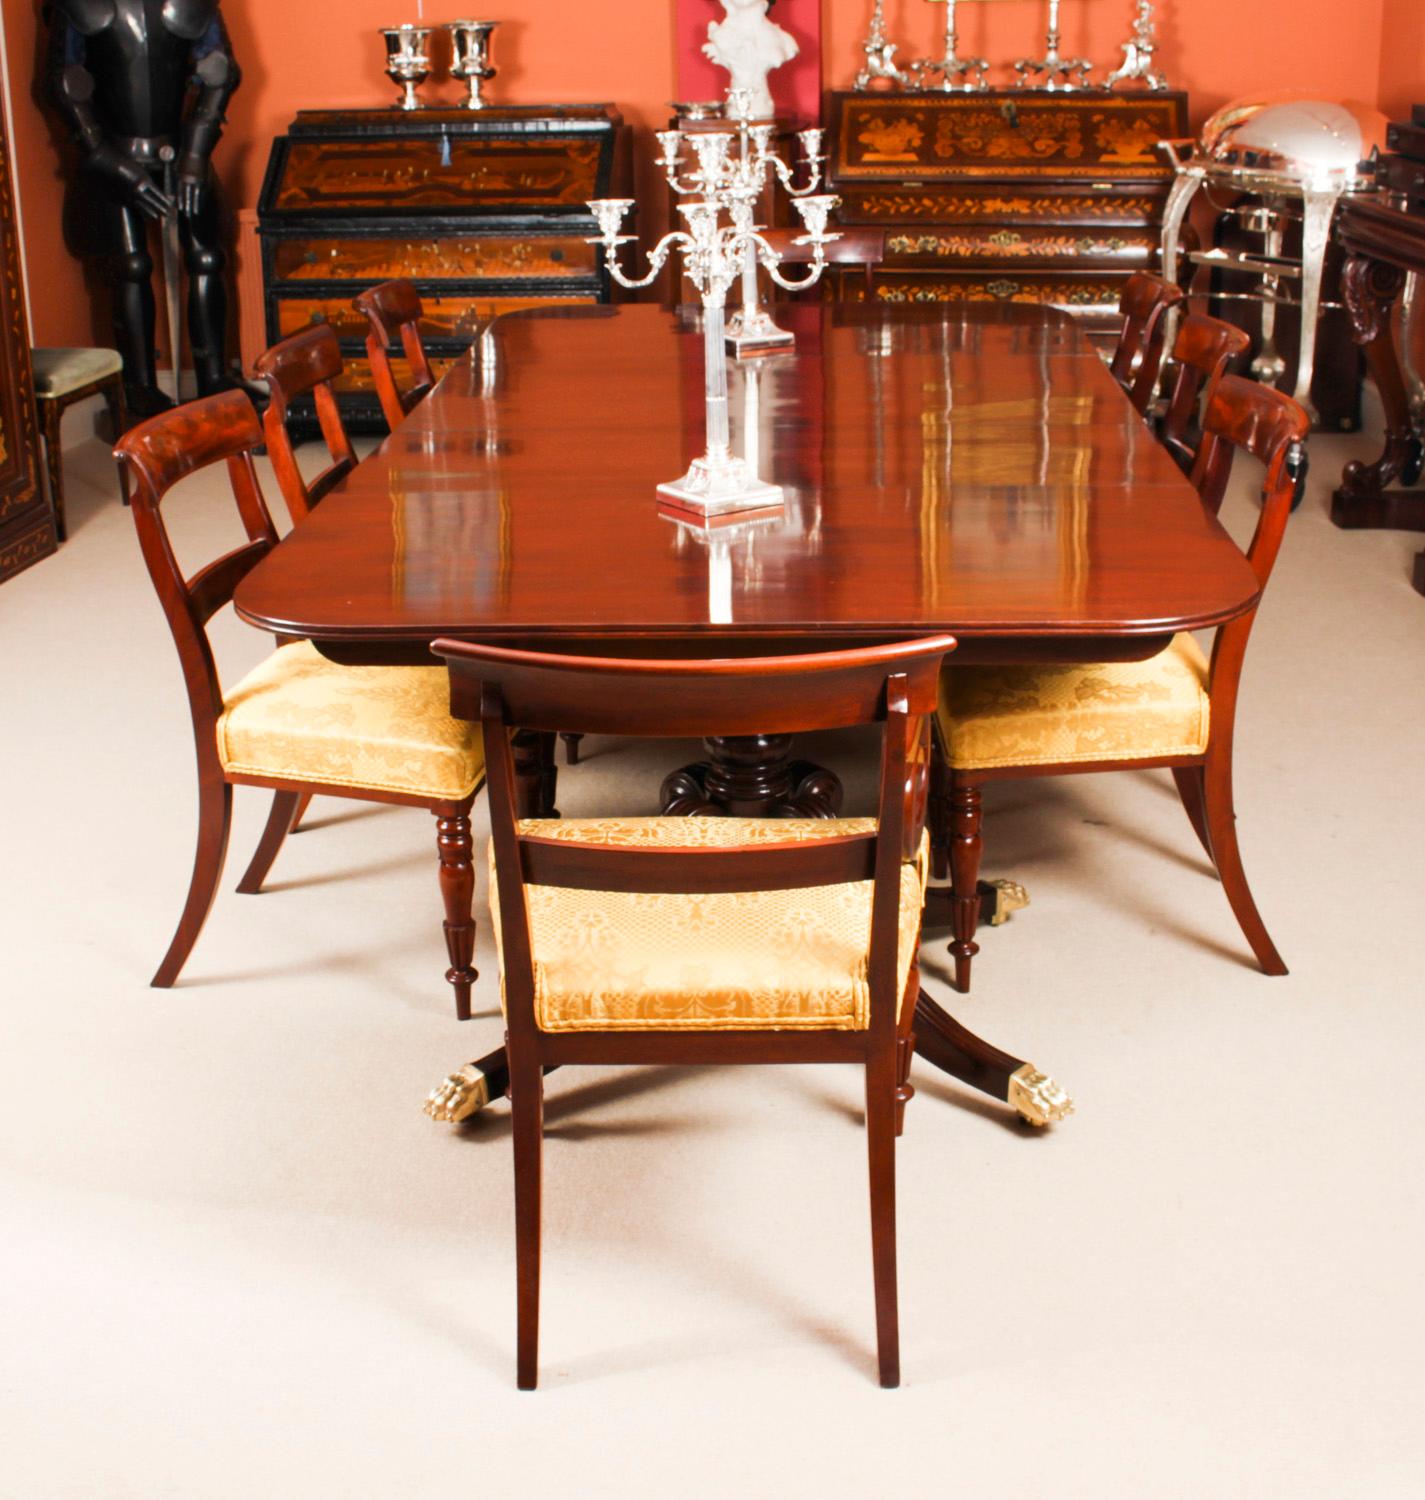 This is an elegant dining set comprising an antique Regency dining table with a set of eight Regency dining chairs, all dating from Circa 1820.

The table is of rectangular form with rounded corners and reeded edge. It is raised on stunning ring and